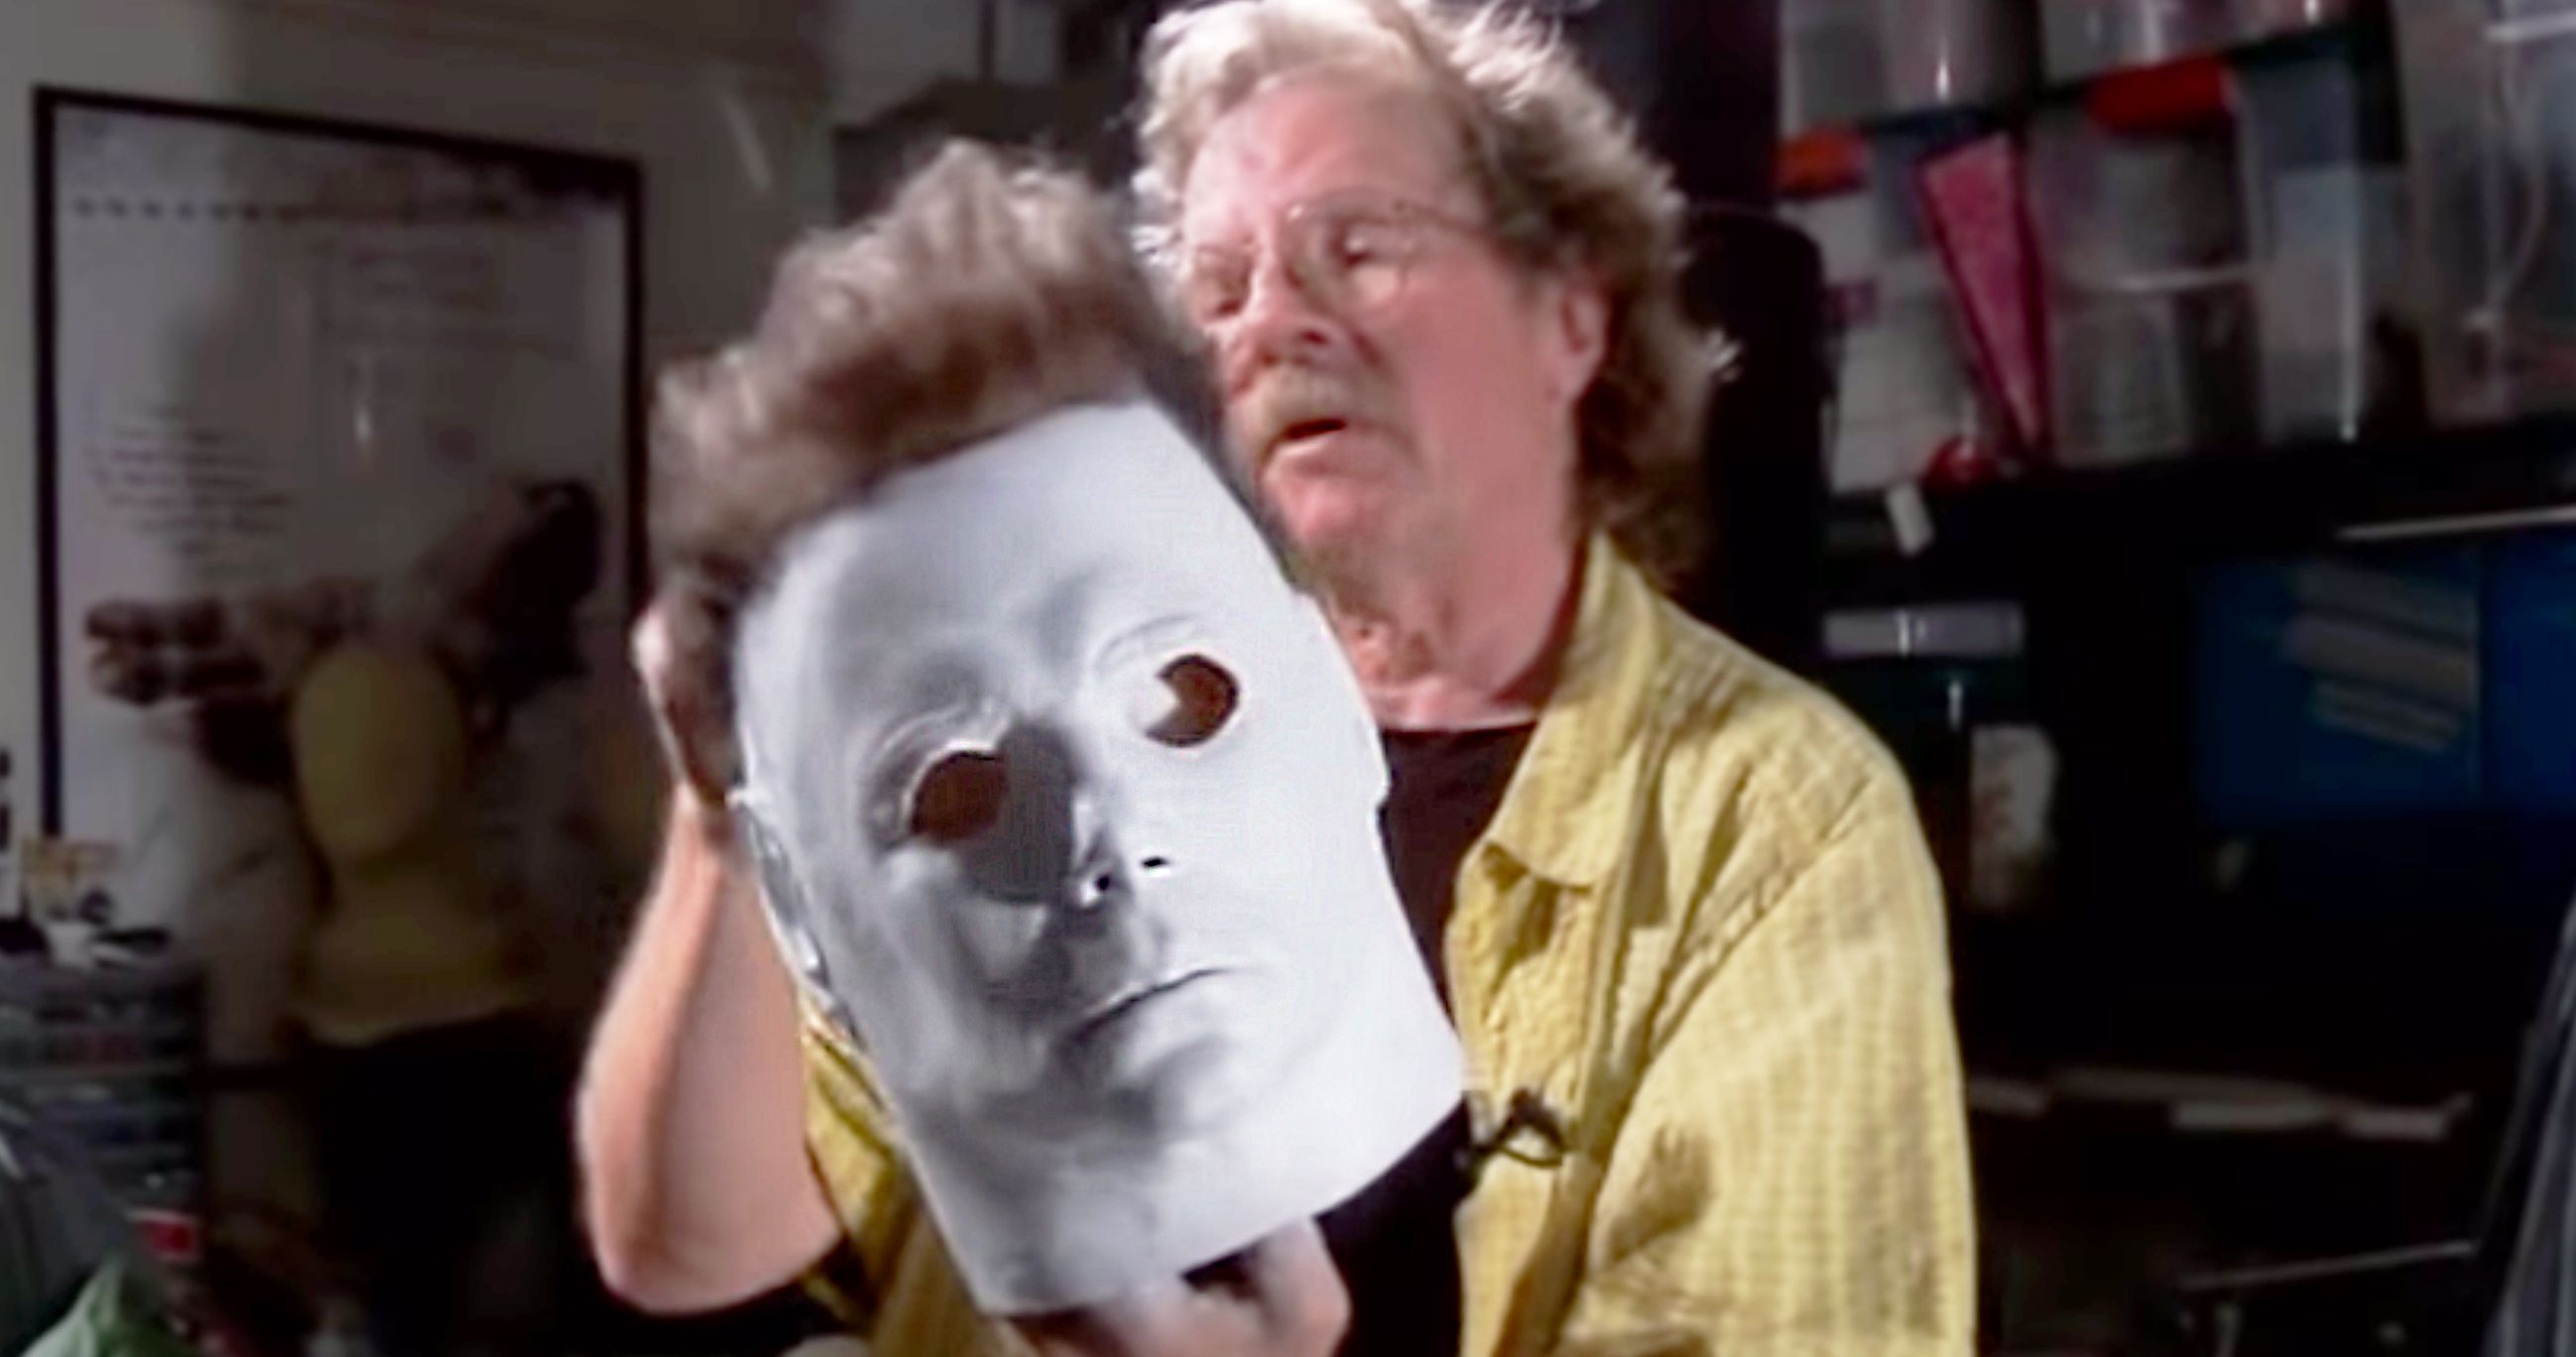 Michael Myers Halloween Mask Creator Explains How Made the Original for the Very First Time